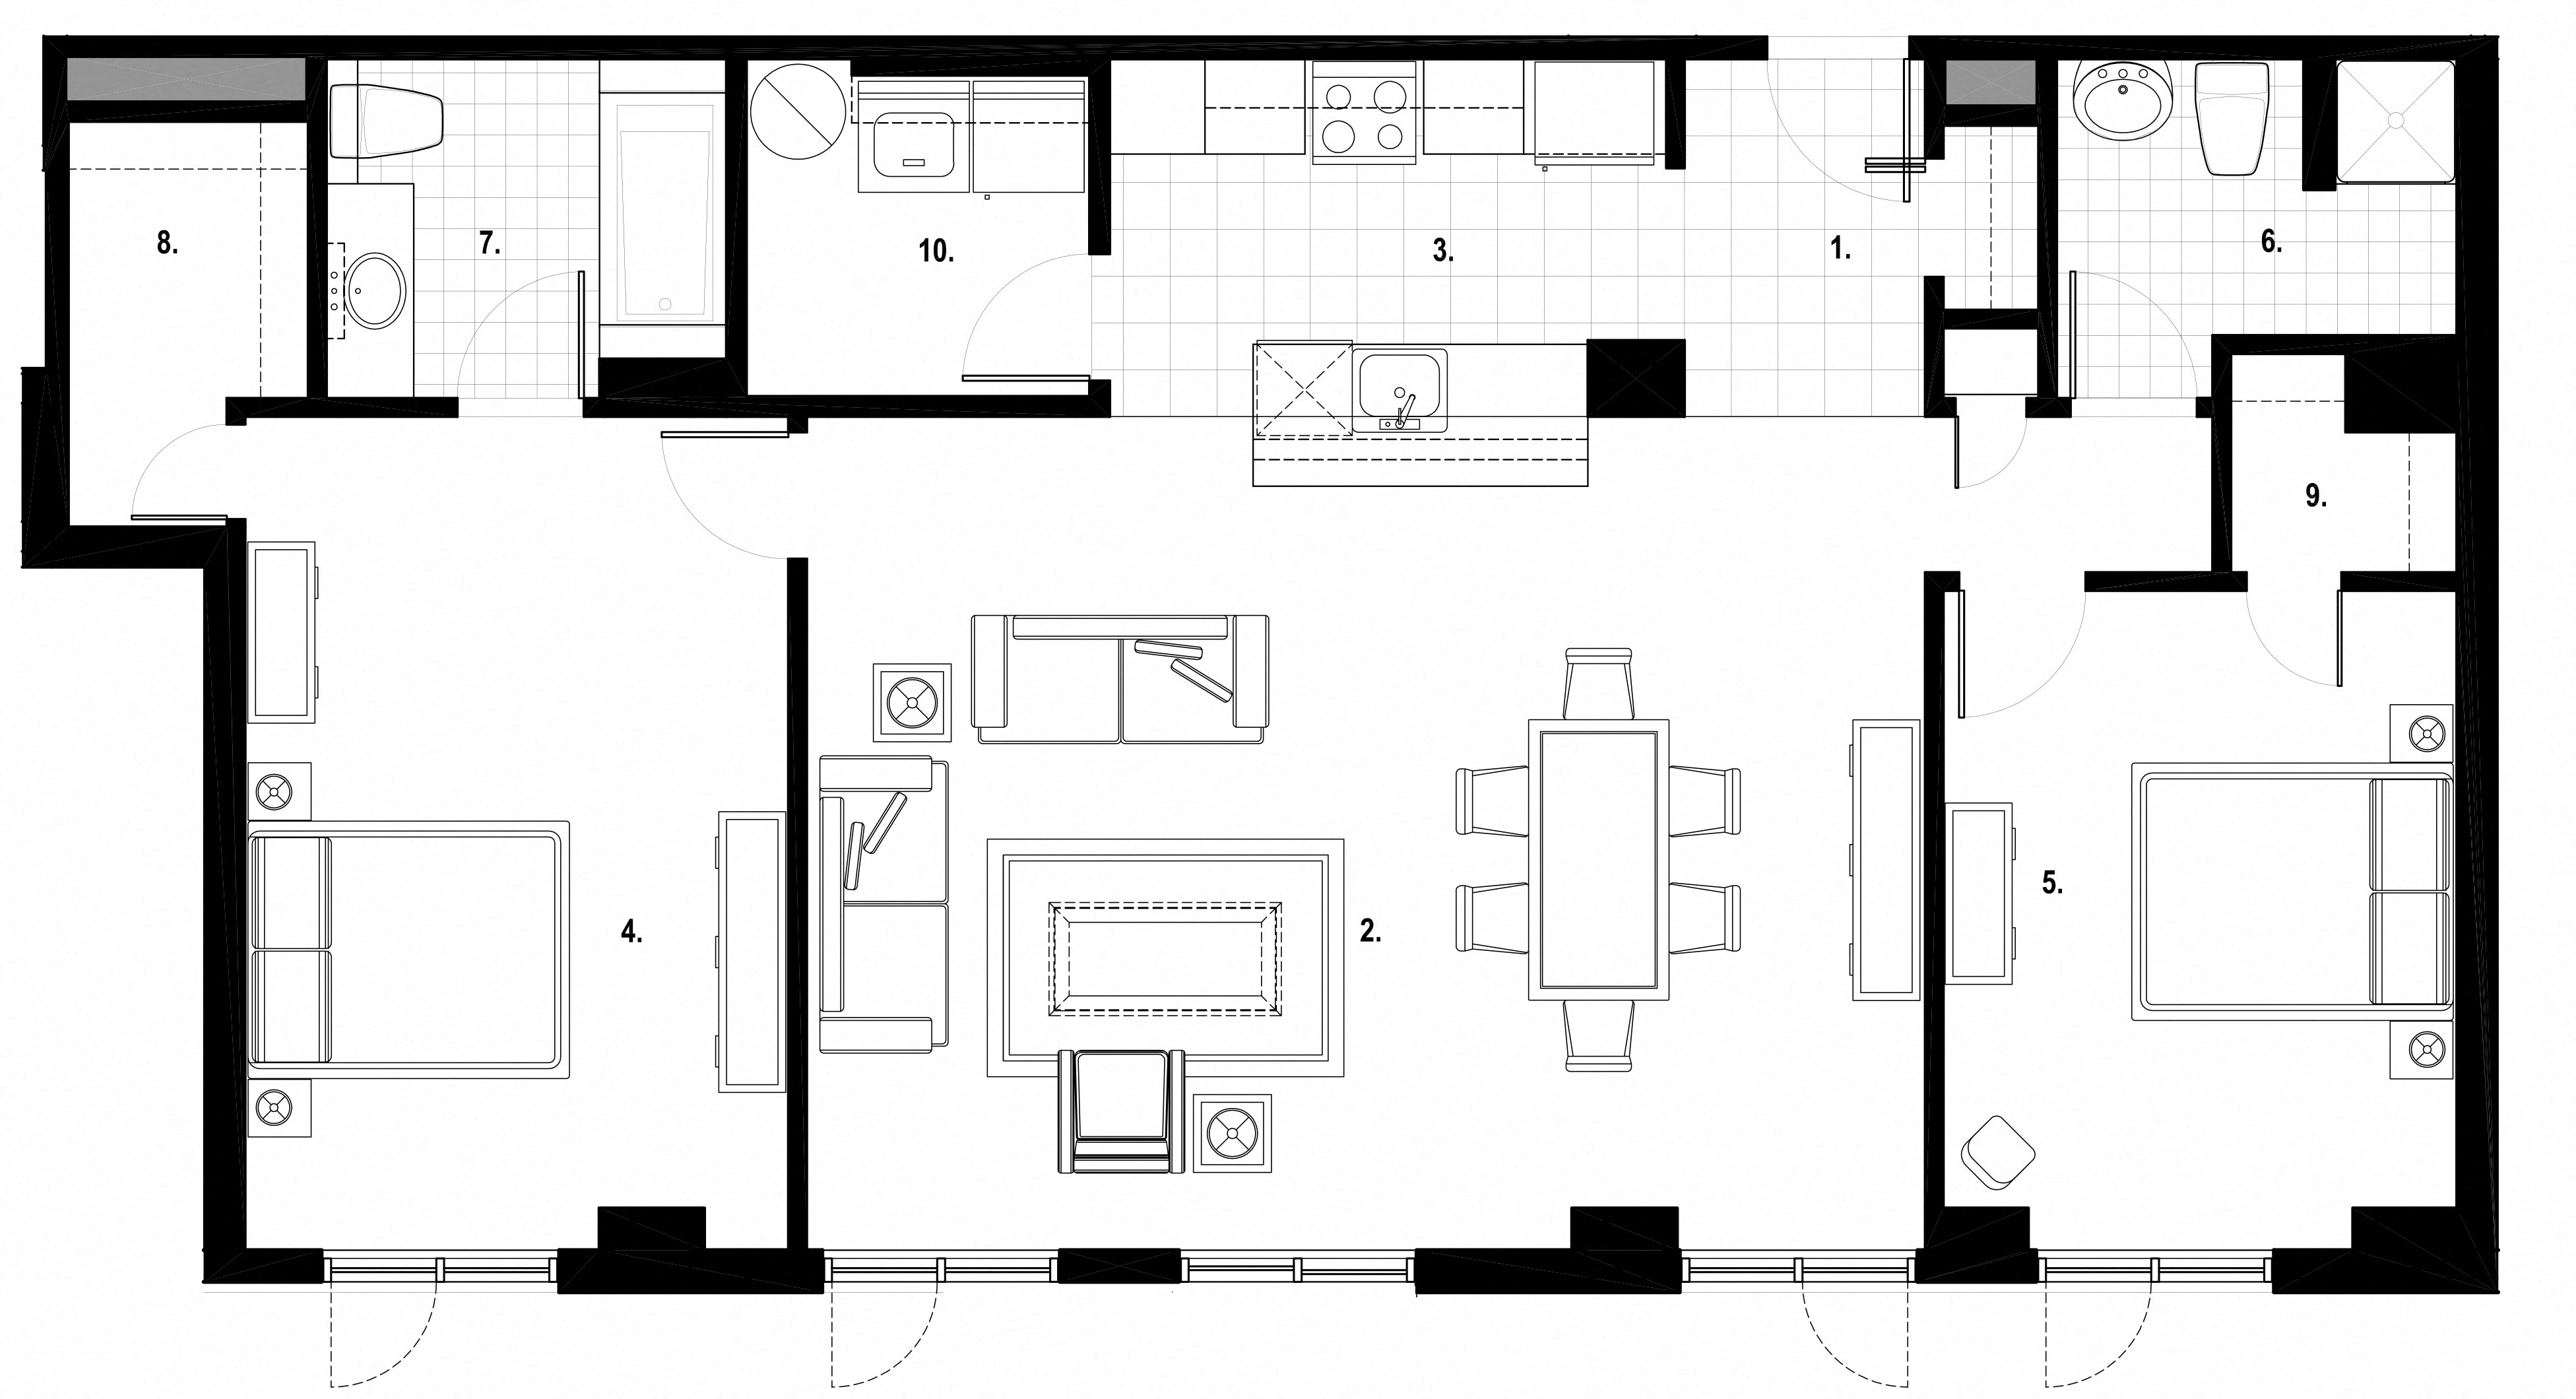 Floor Plans of Excelsior Apartments in Montreal, QC